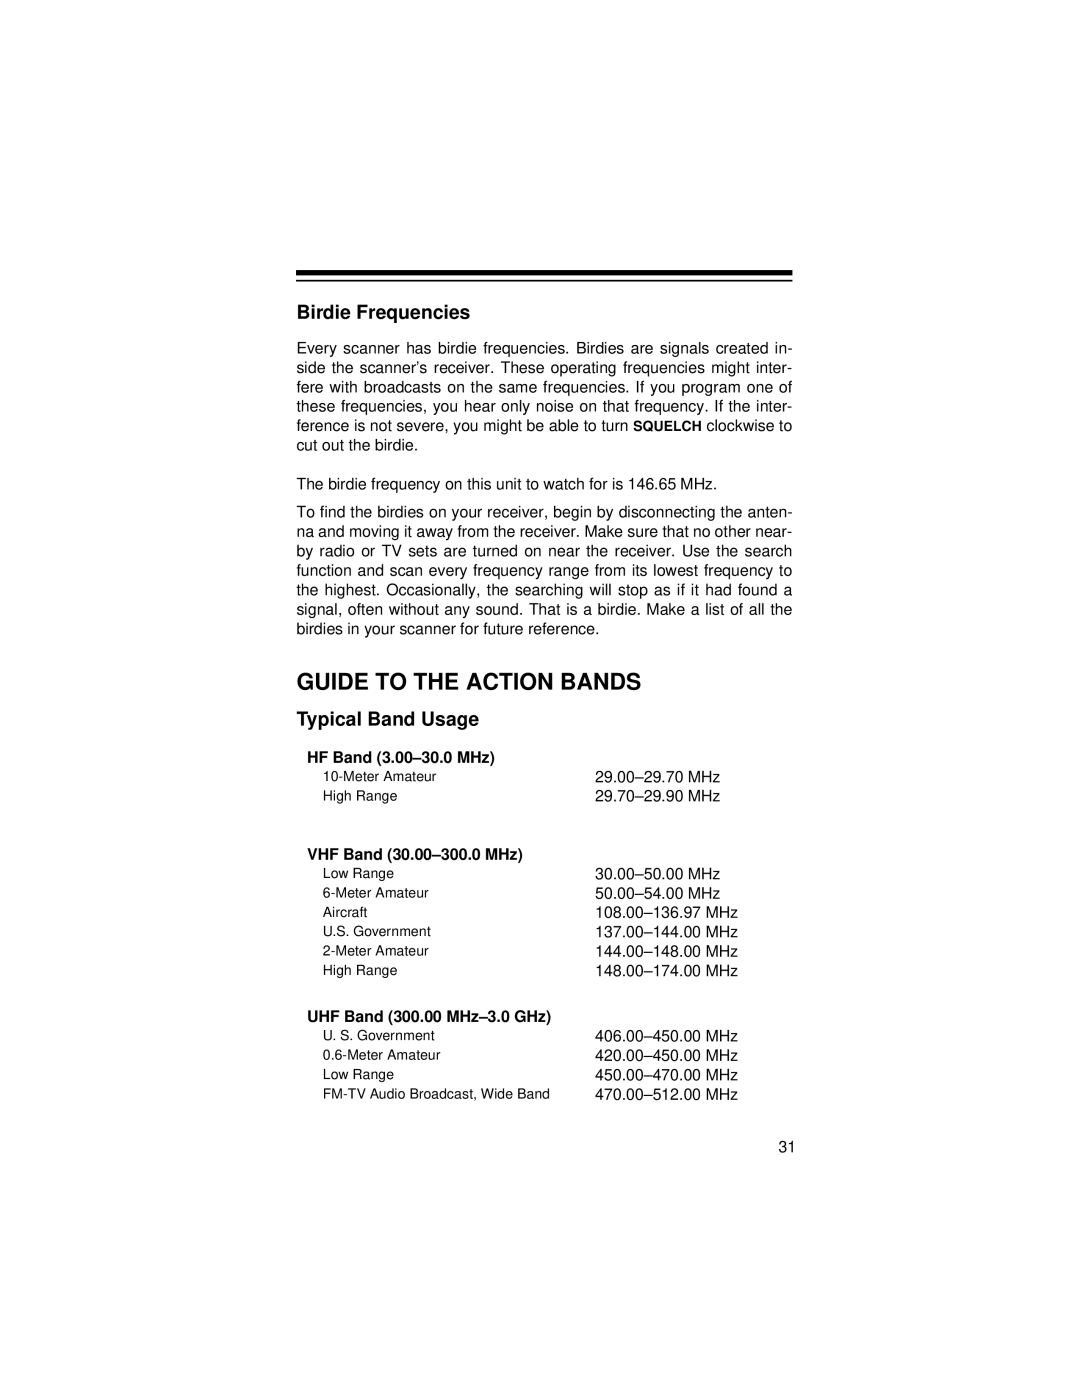 Radio Shack Pro-71 owner manual Guide to the Action Bands, Birdie Frequencies, Typical Band Usage 